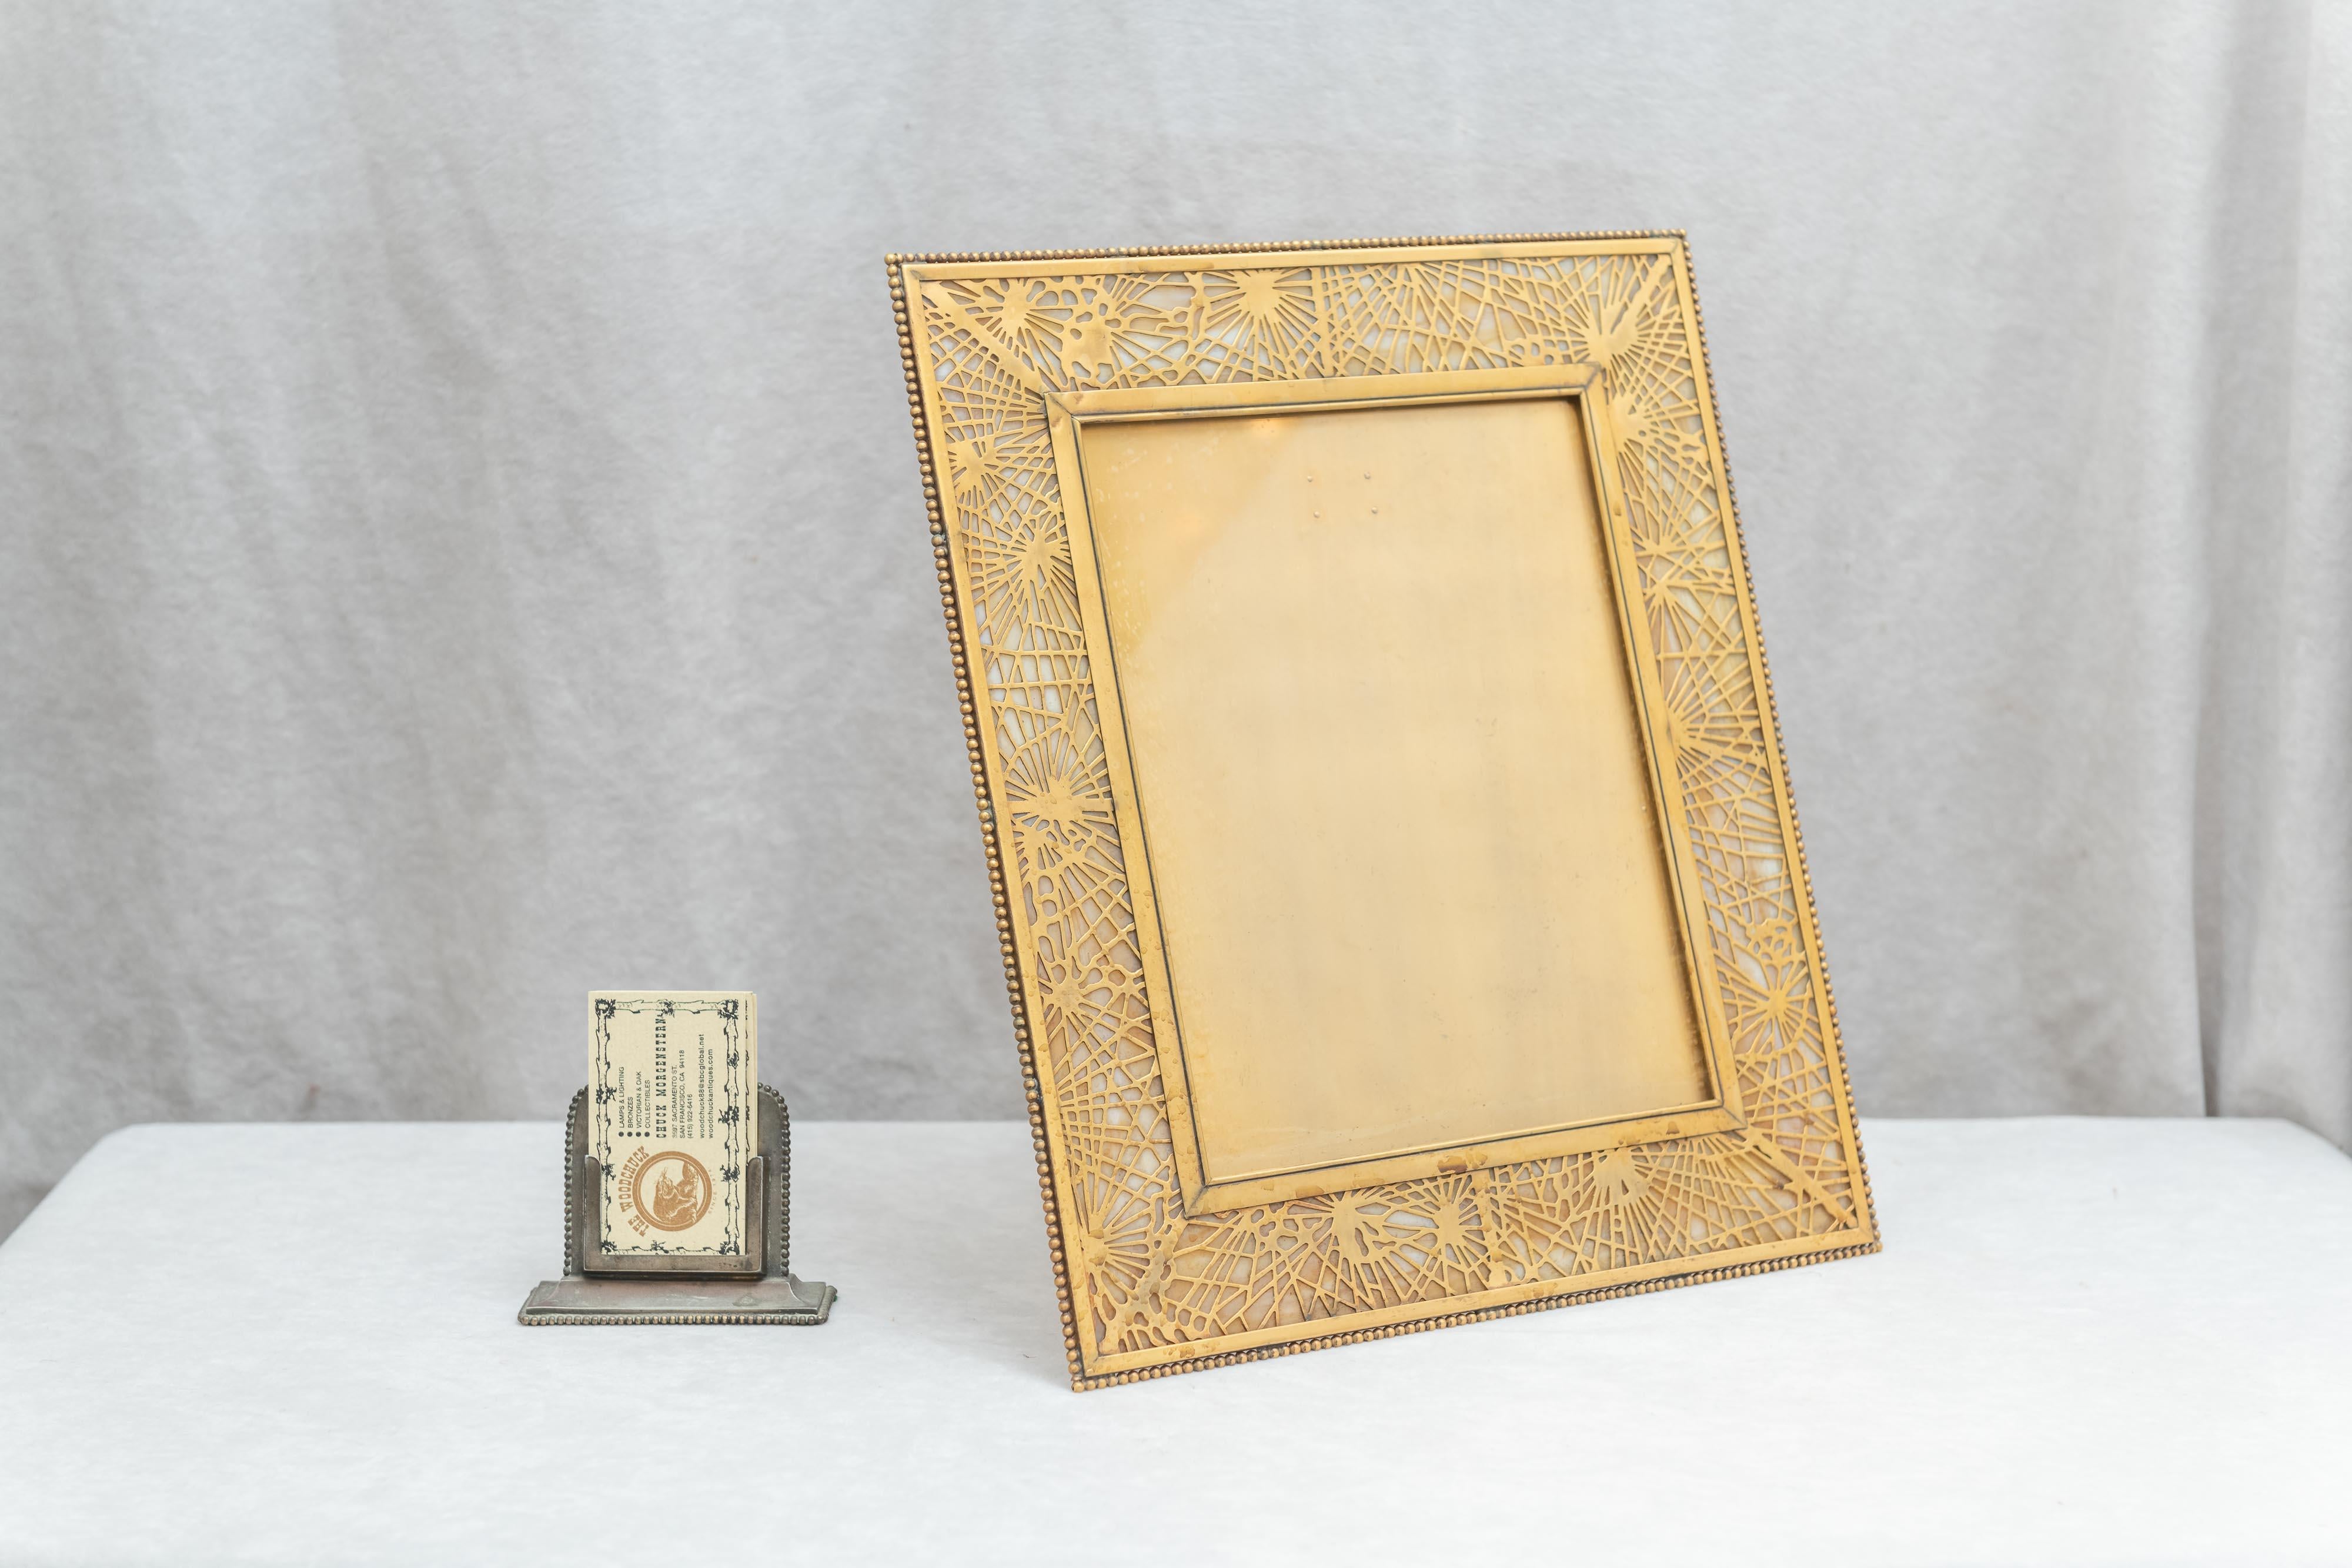 This is the same Tiffany Studios who made all those wonderful lamps. Among other items they are picture frames. Many of the more desirable ones had glass around the border as is the case here. This is about as large a picture frame as Tiffany made.